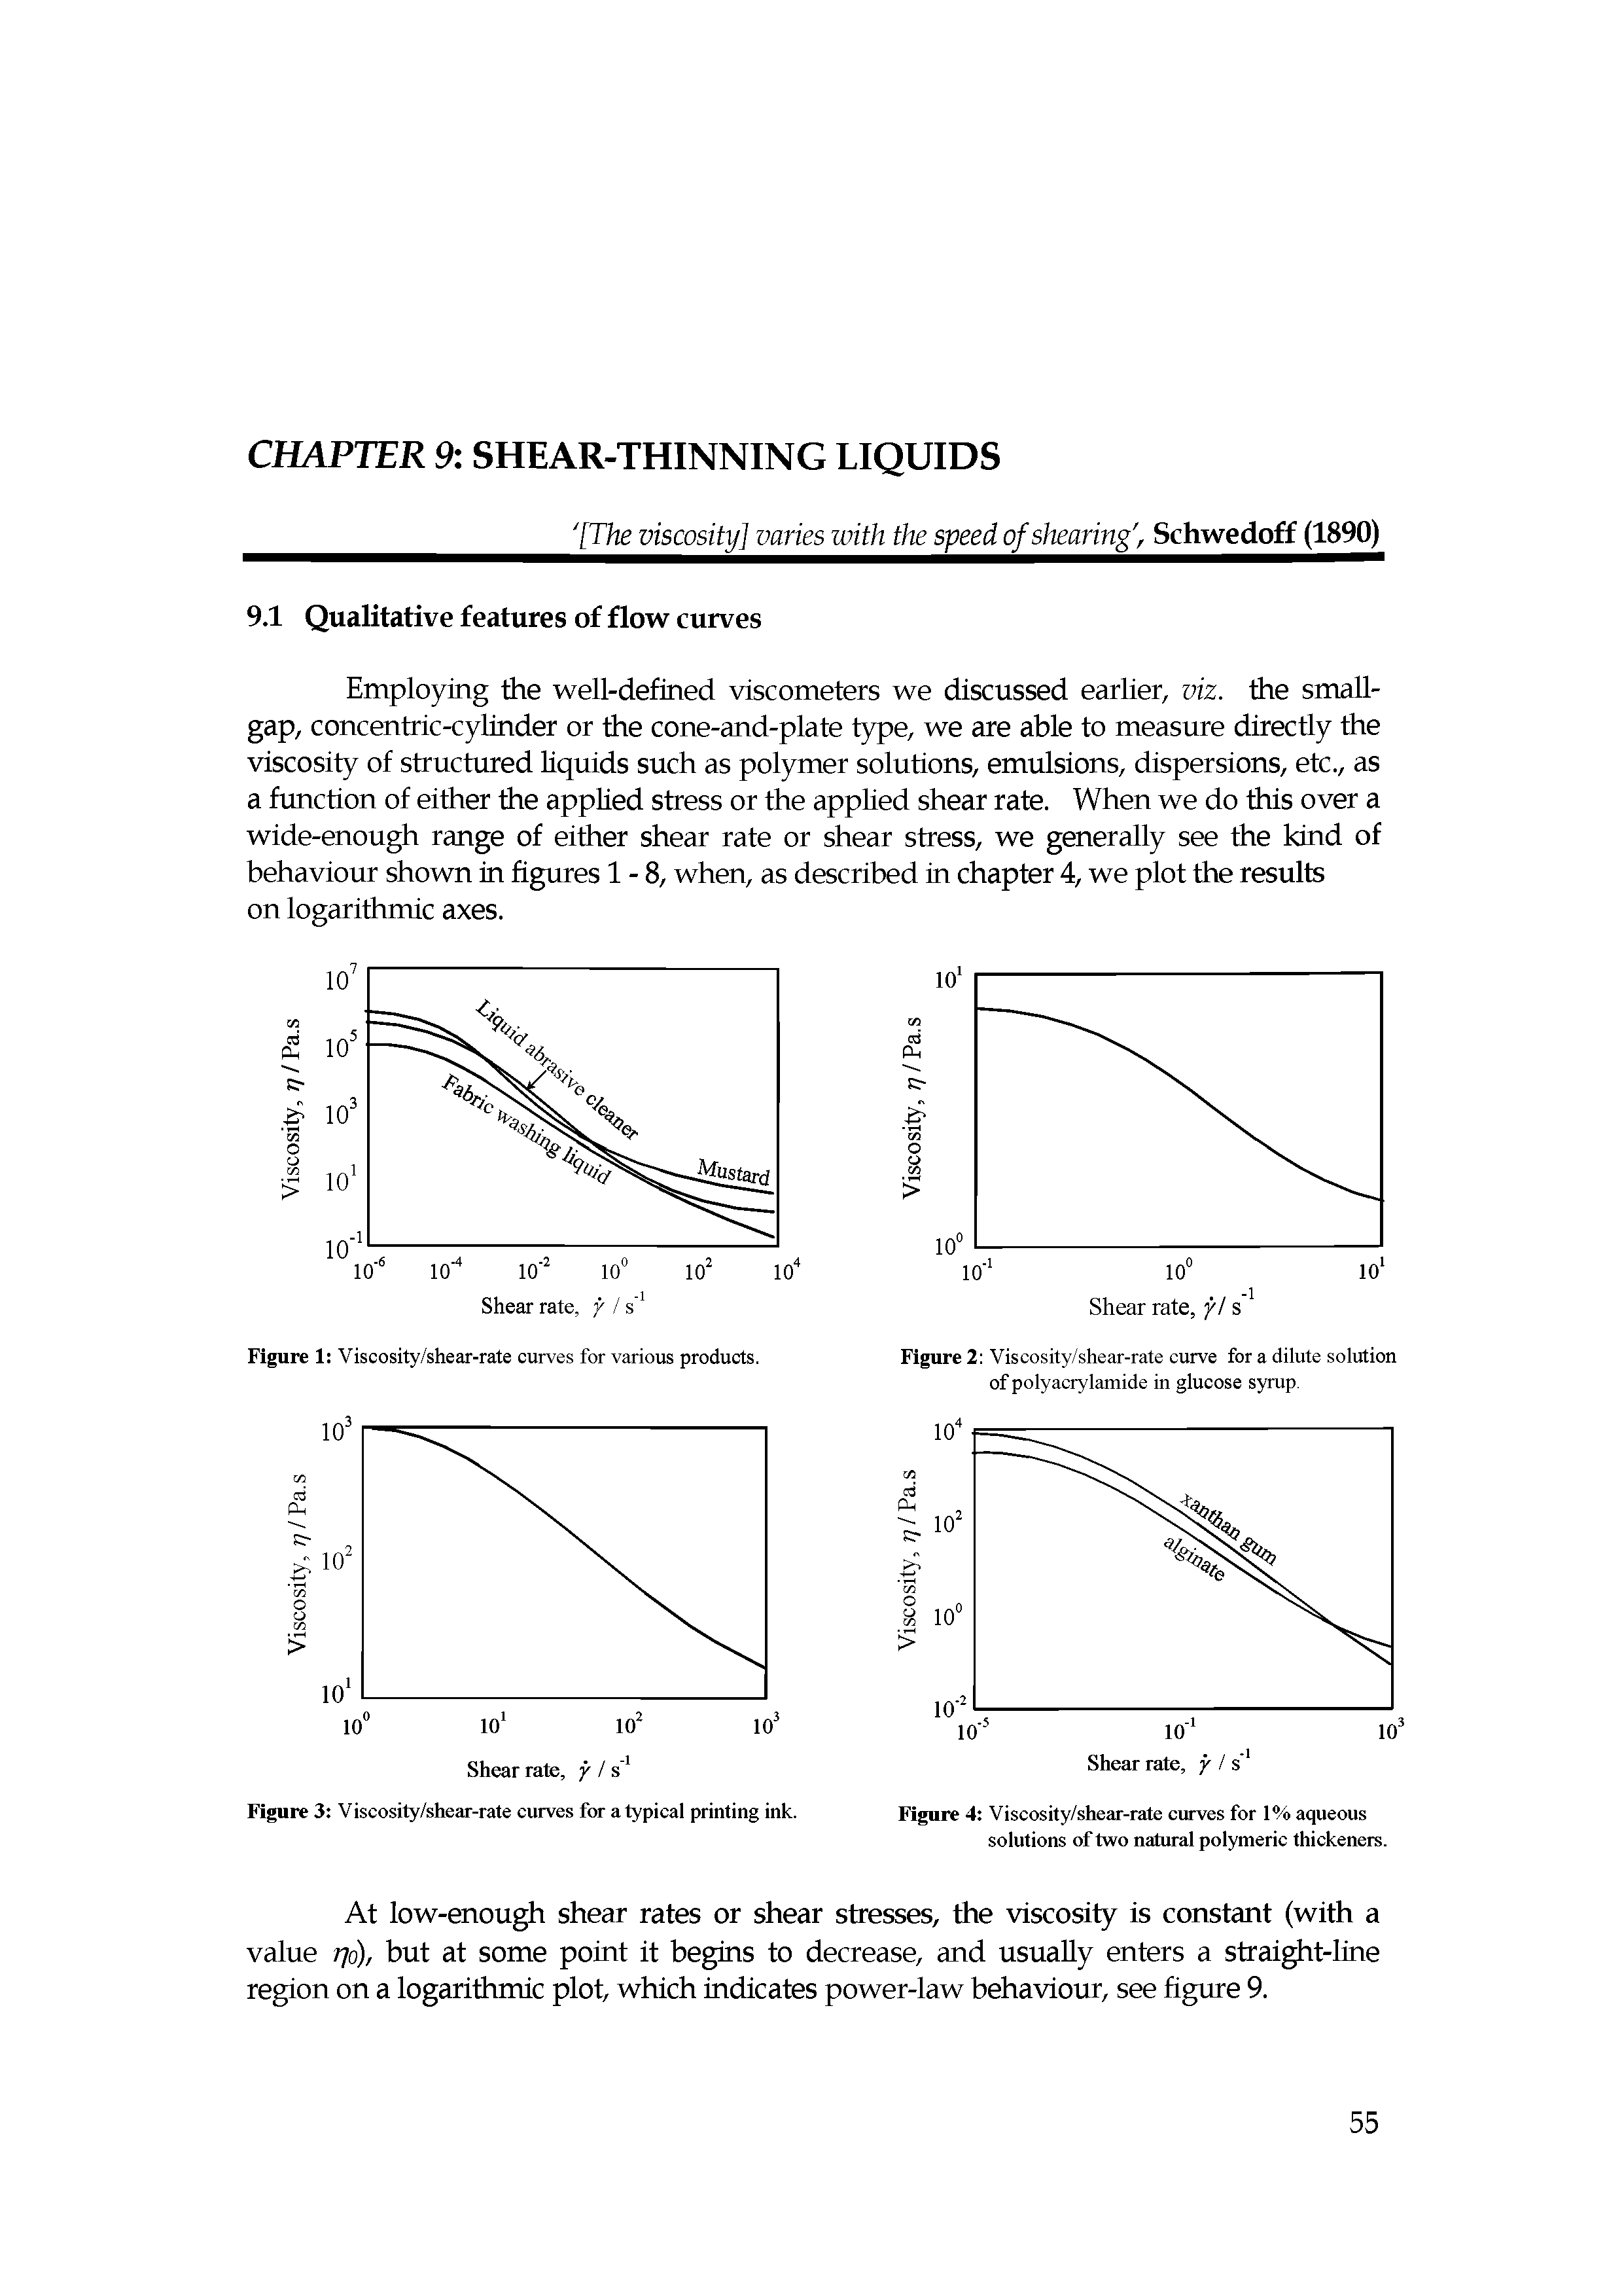 Figure 2 Viscosity/shear-rate curve for a dilute solution of polyacrylamide in glucose syrup.